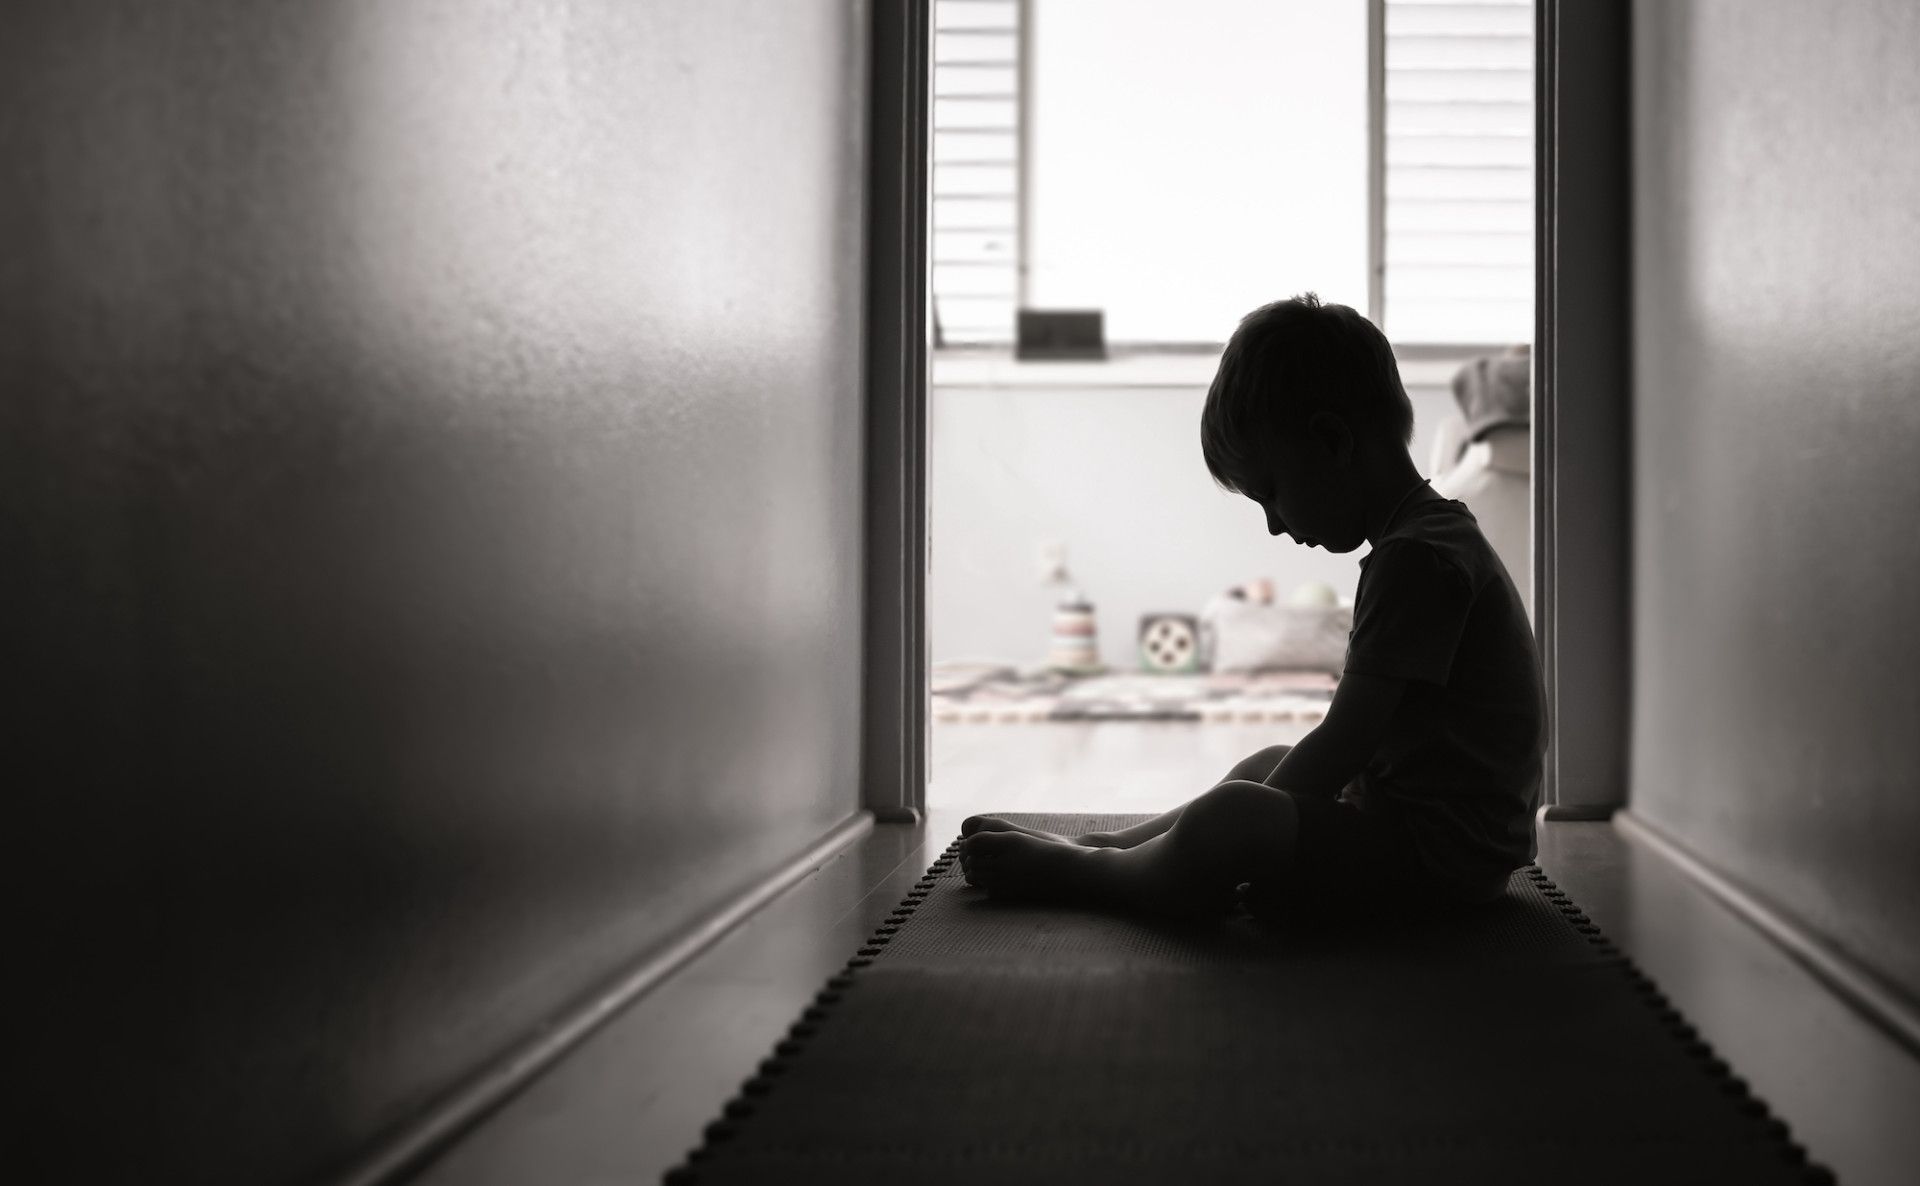 A child sits in shadows at the end of a hallway.